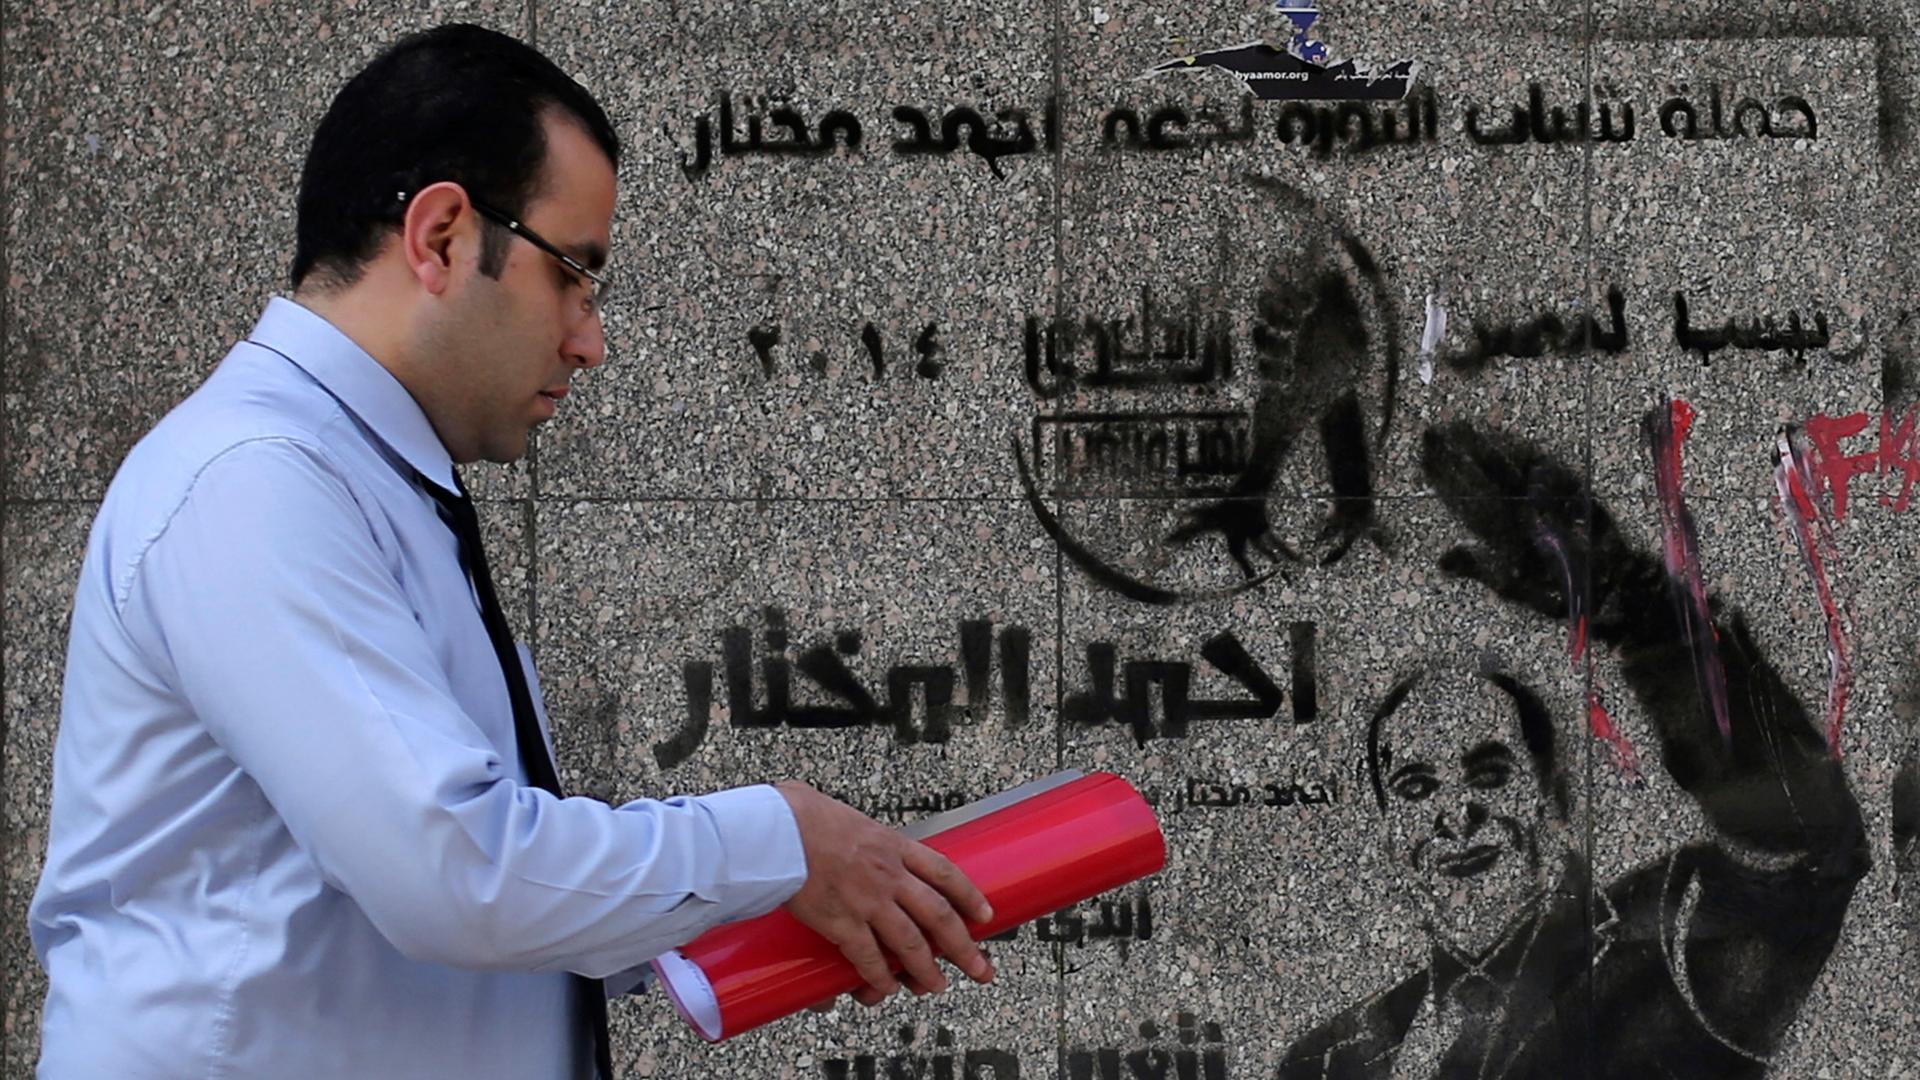 A man walks past a wall graffiti regarding the 2014 presidential election in downtown Cairo, February 25, 2014. The graffiti reads: "Ahmed Al Mukhtar - President of Egypt, Your hand with my hand, we can change our country."